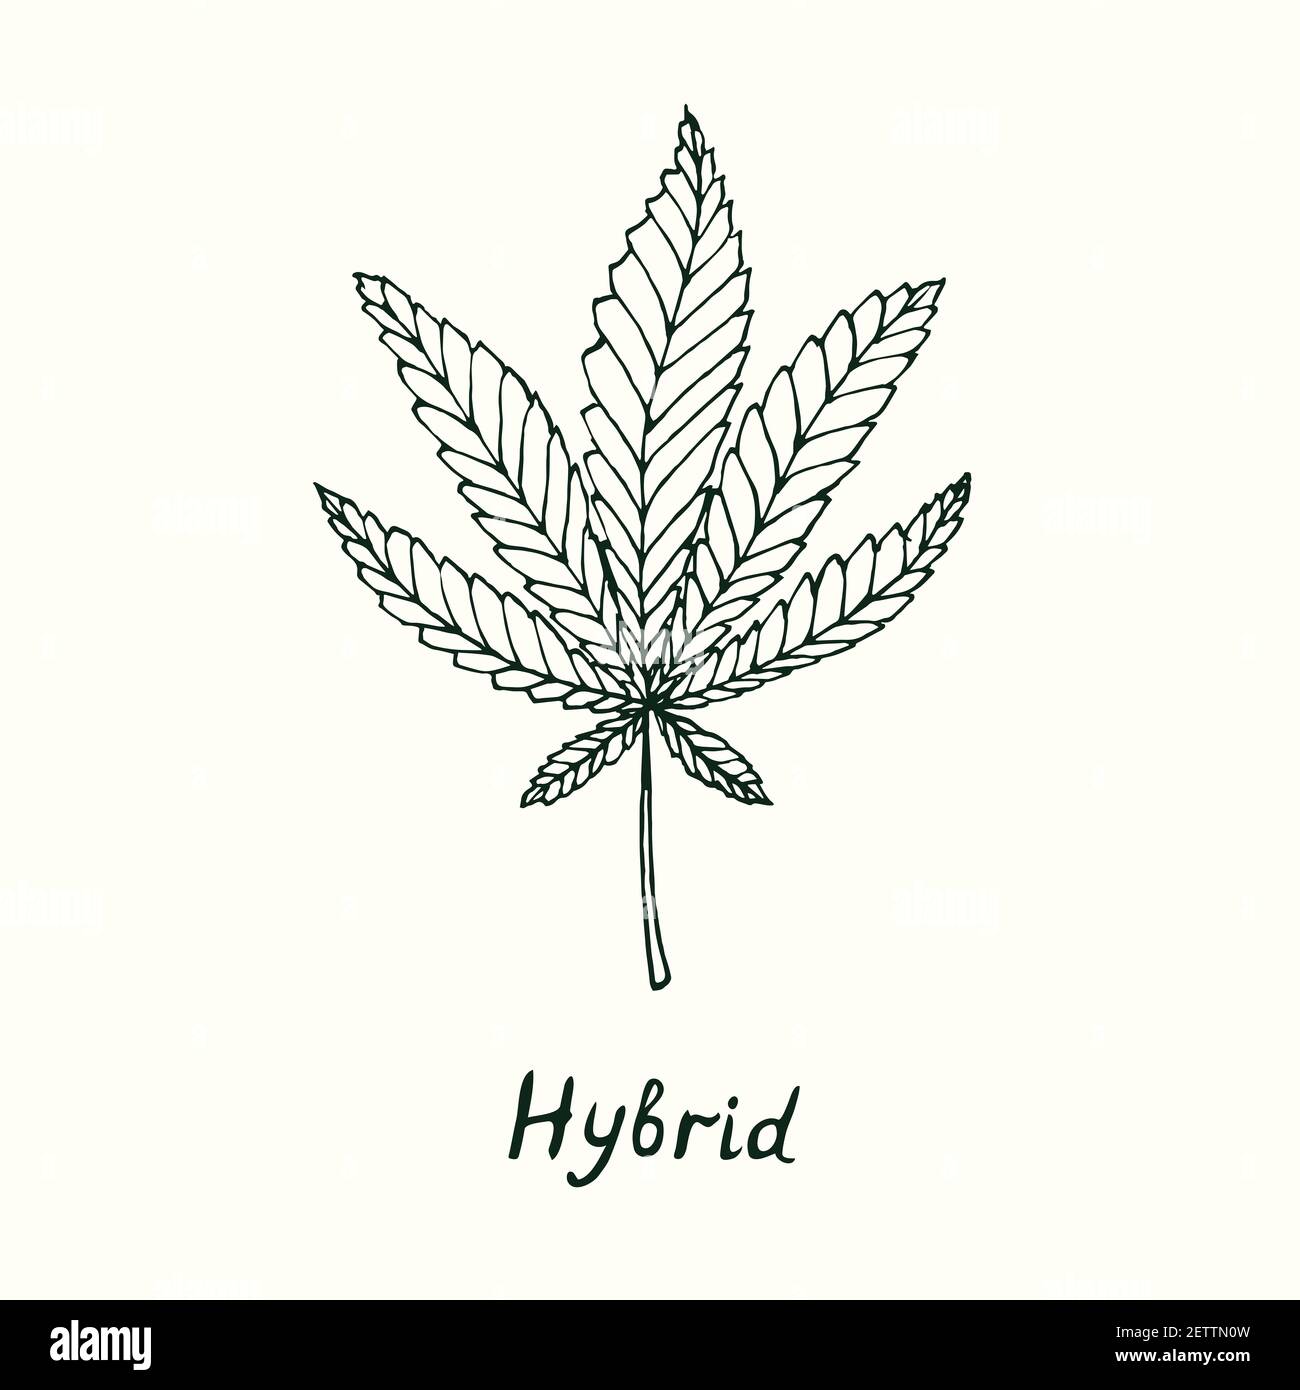 Hybrid cannabis leaf isolated, outline simple doodle drawing, gravure style  Stock Photo - Alamy